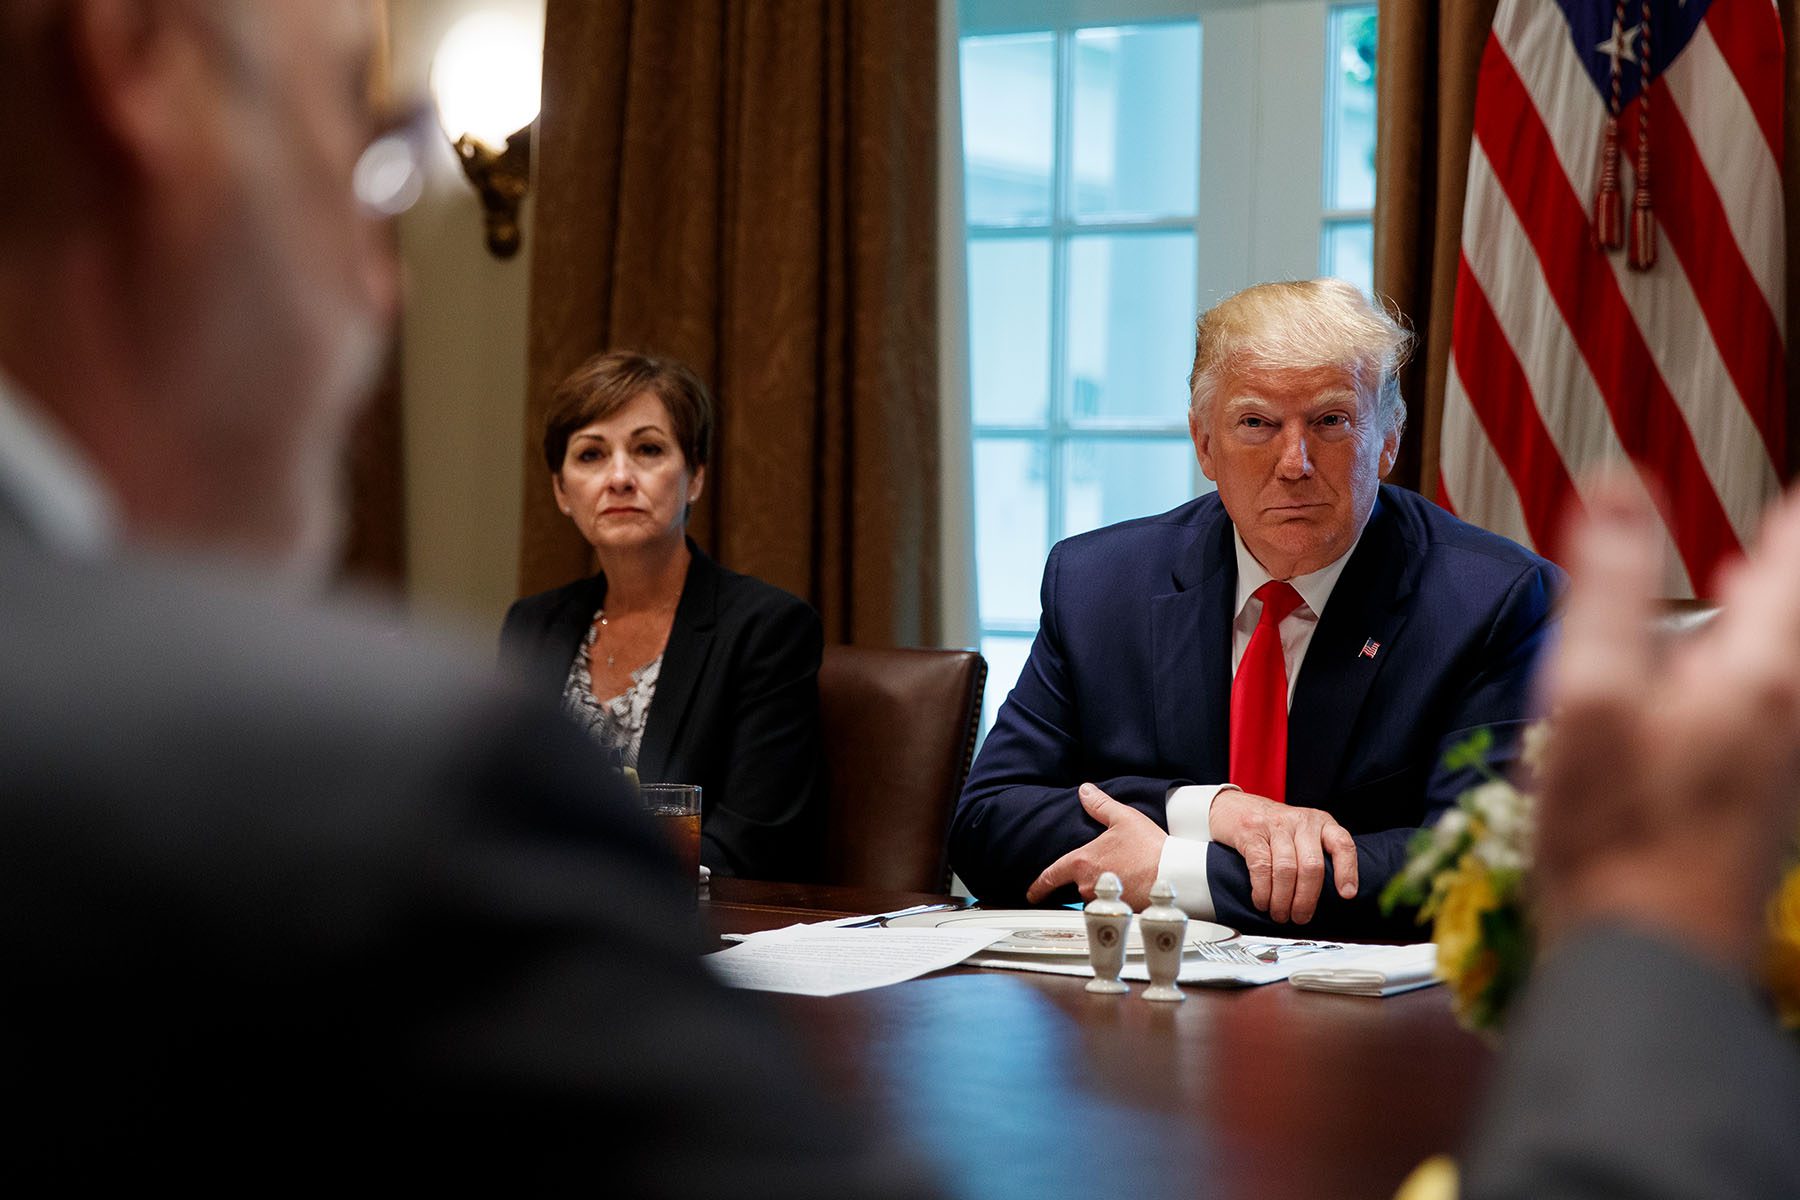 Gov. Kim Reynolds and former President Trump sit together during a meeting at the White House.